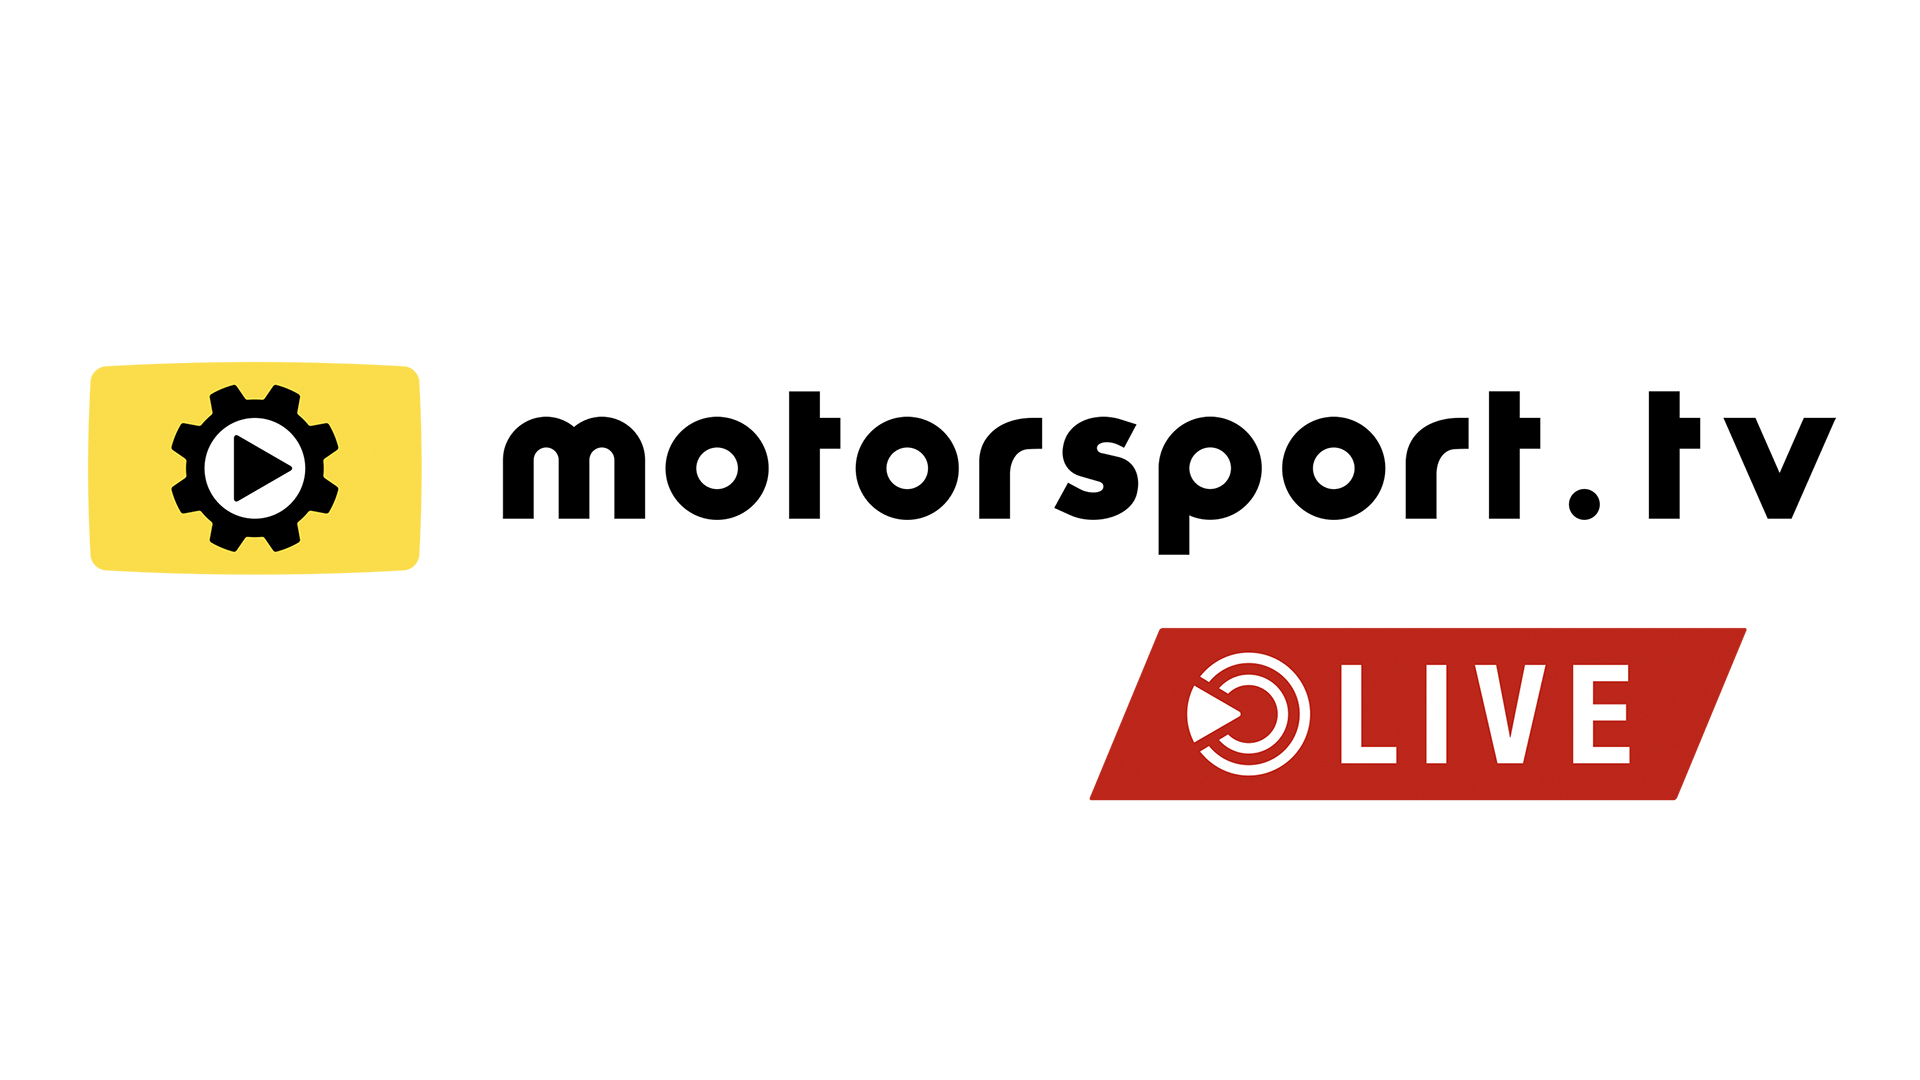 Motorsport Live news channel set to launch Advanced Television